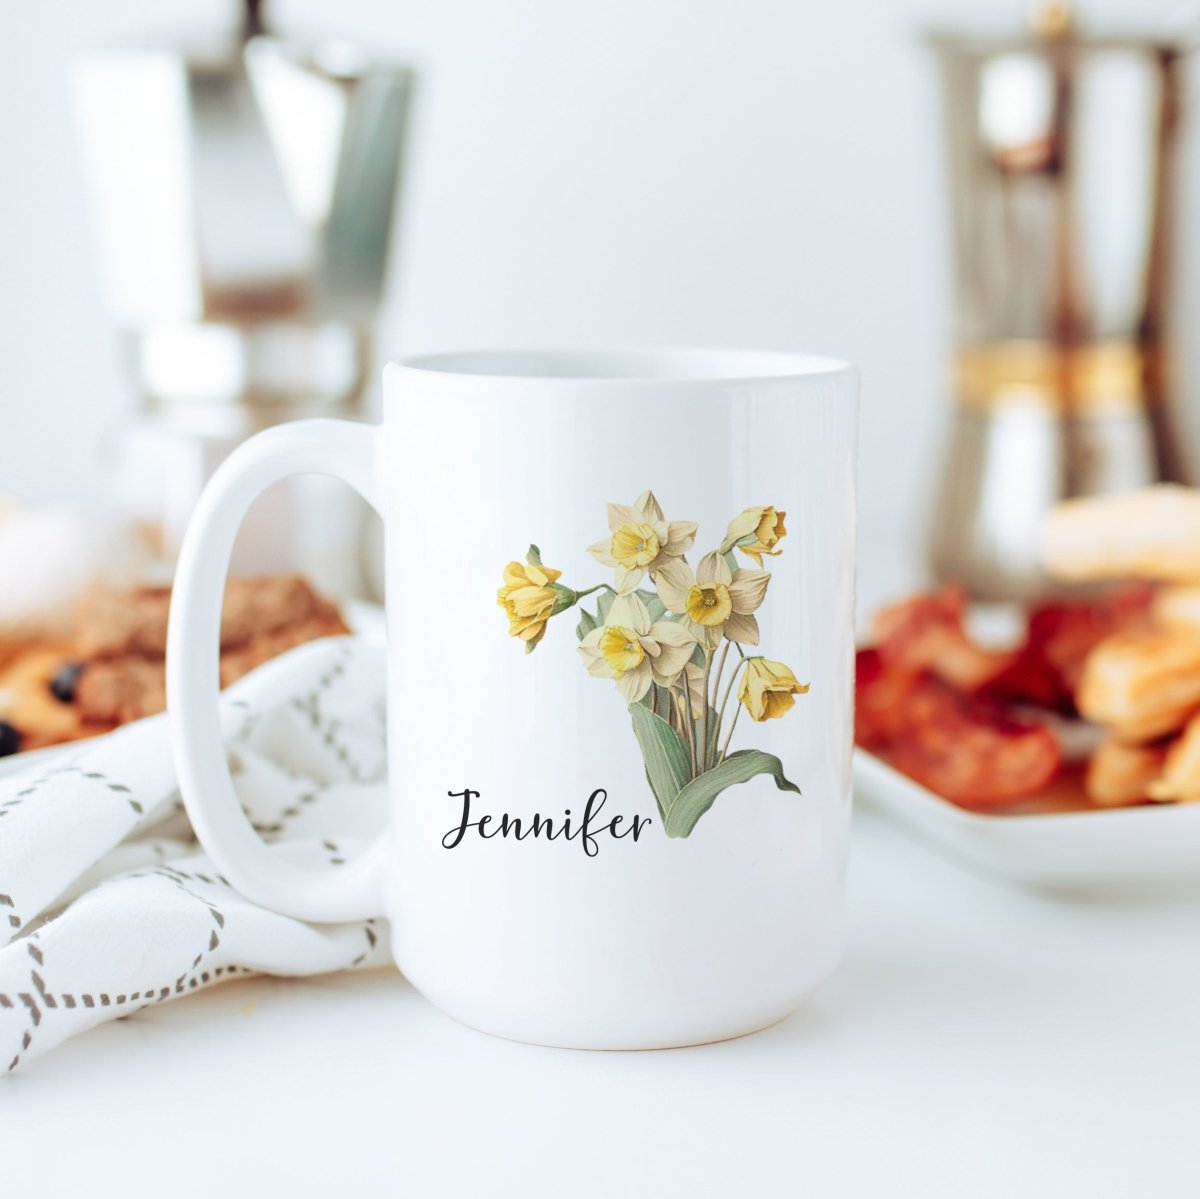 Personalized March Birth Month Flower Mug - Zookaboo